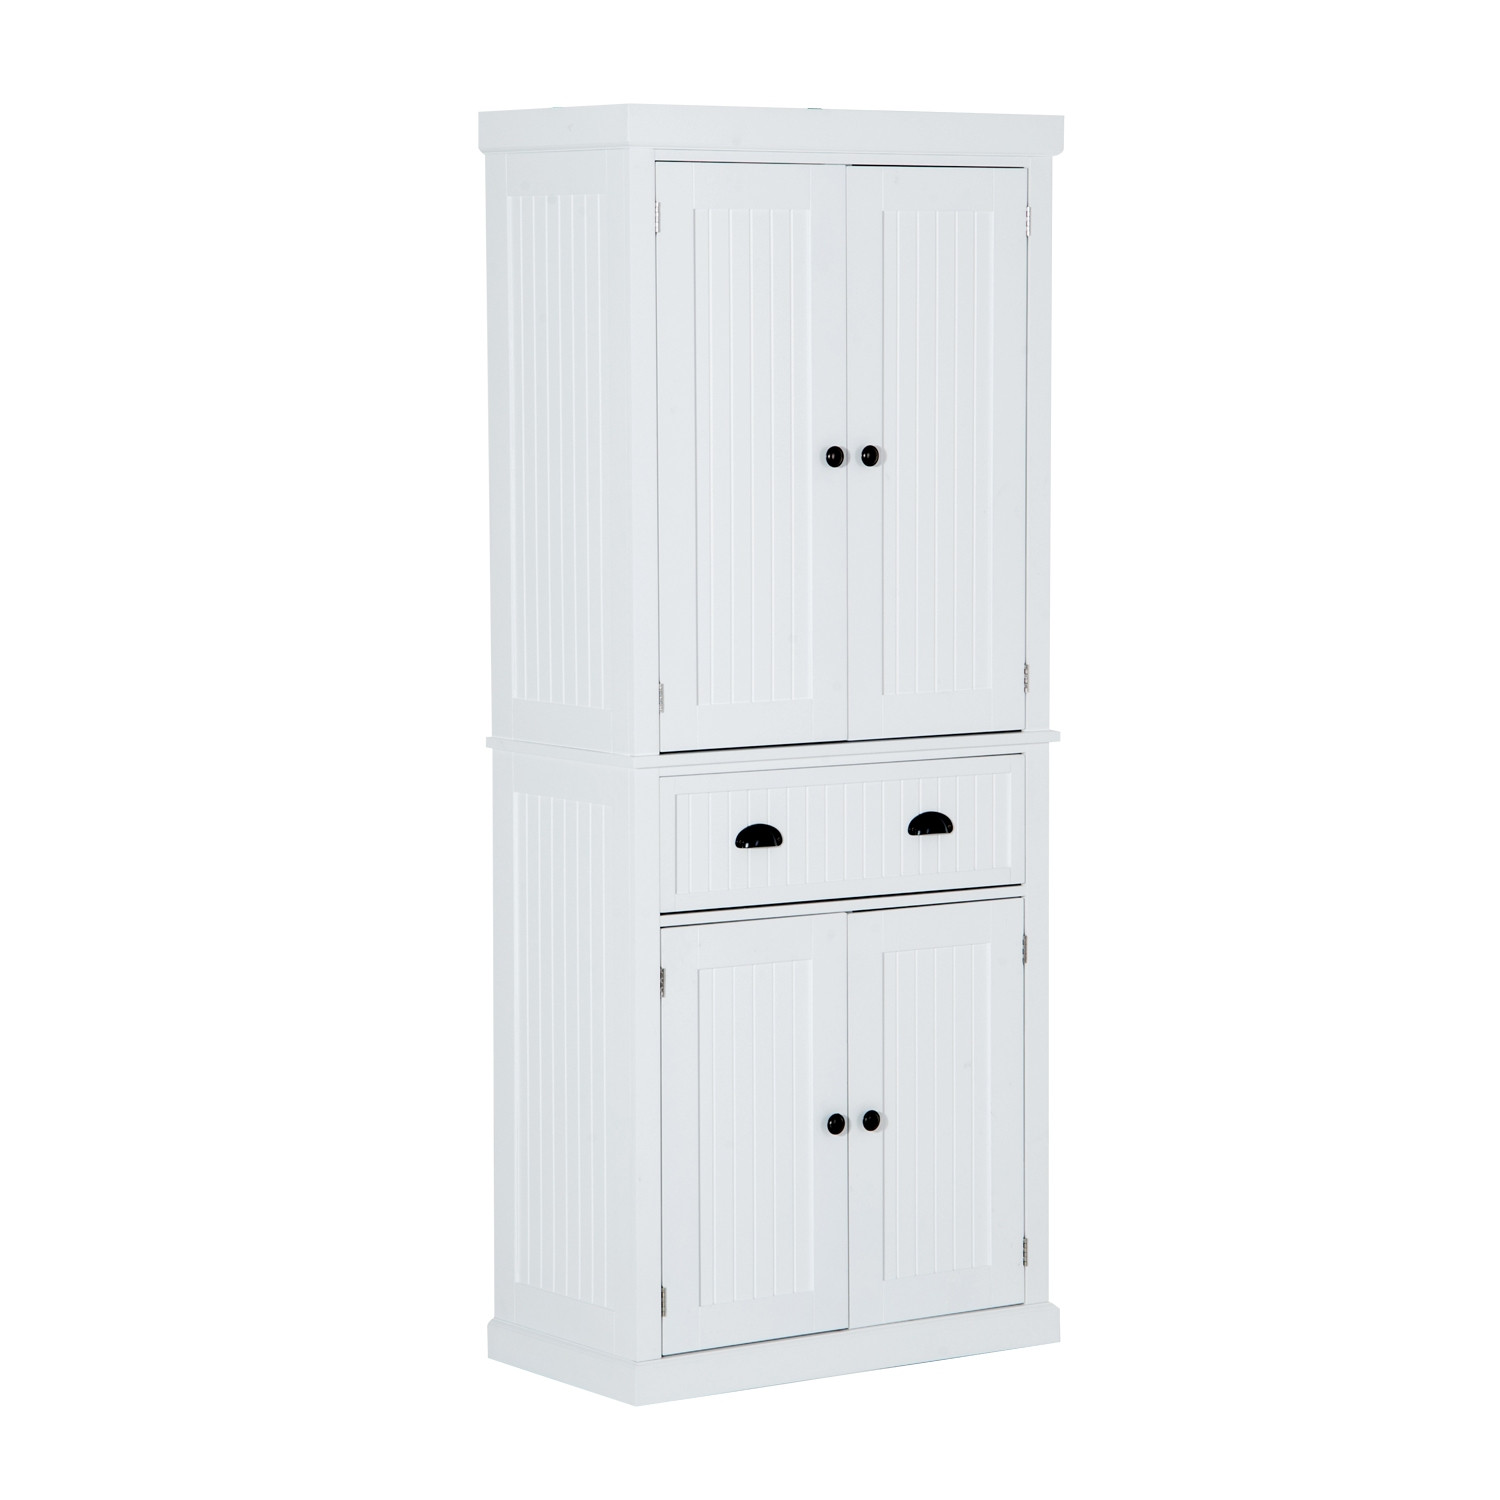 White Kitchen Pantry Freestanding
 Aosom Hom Free Standing Colonial Wood Storage